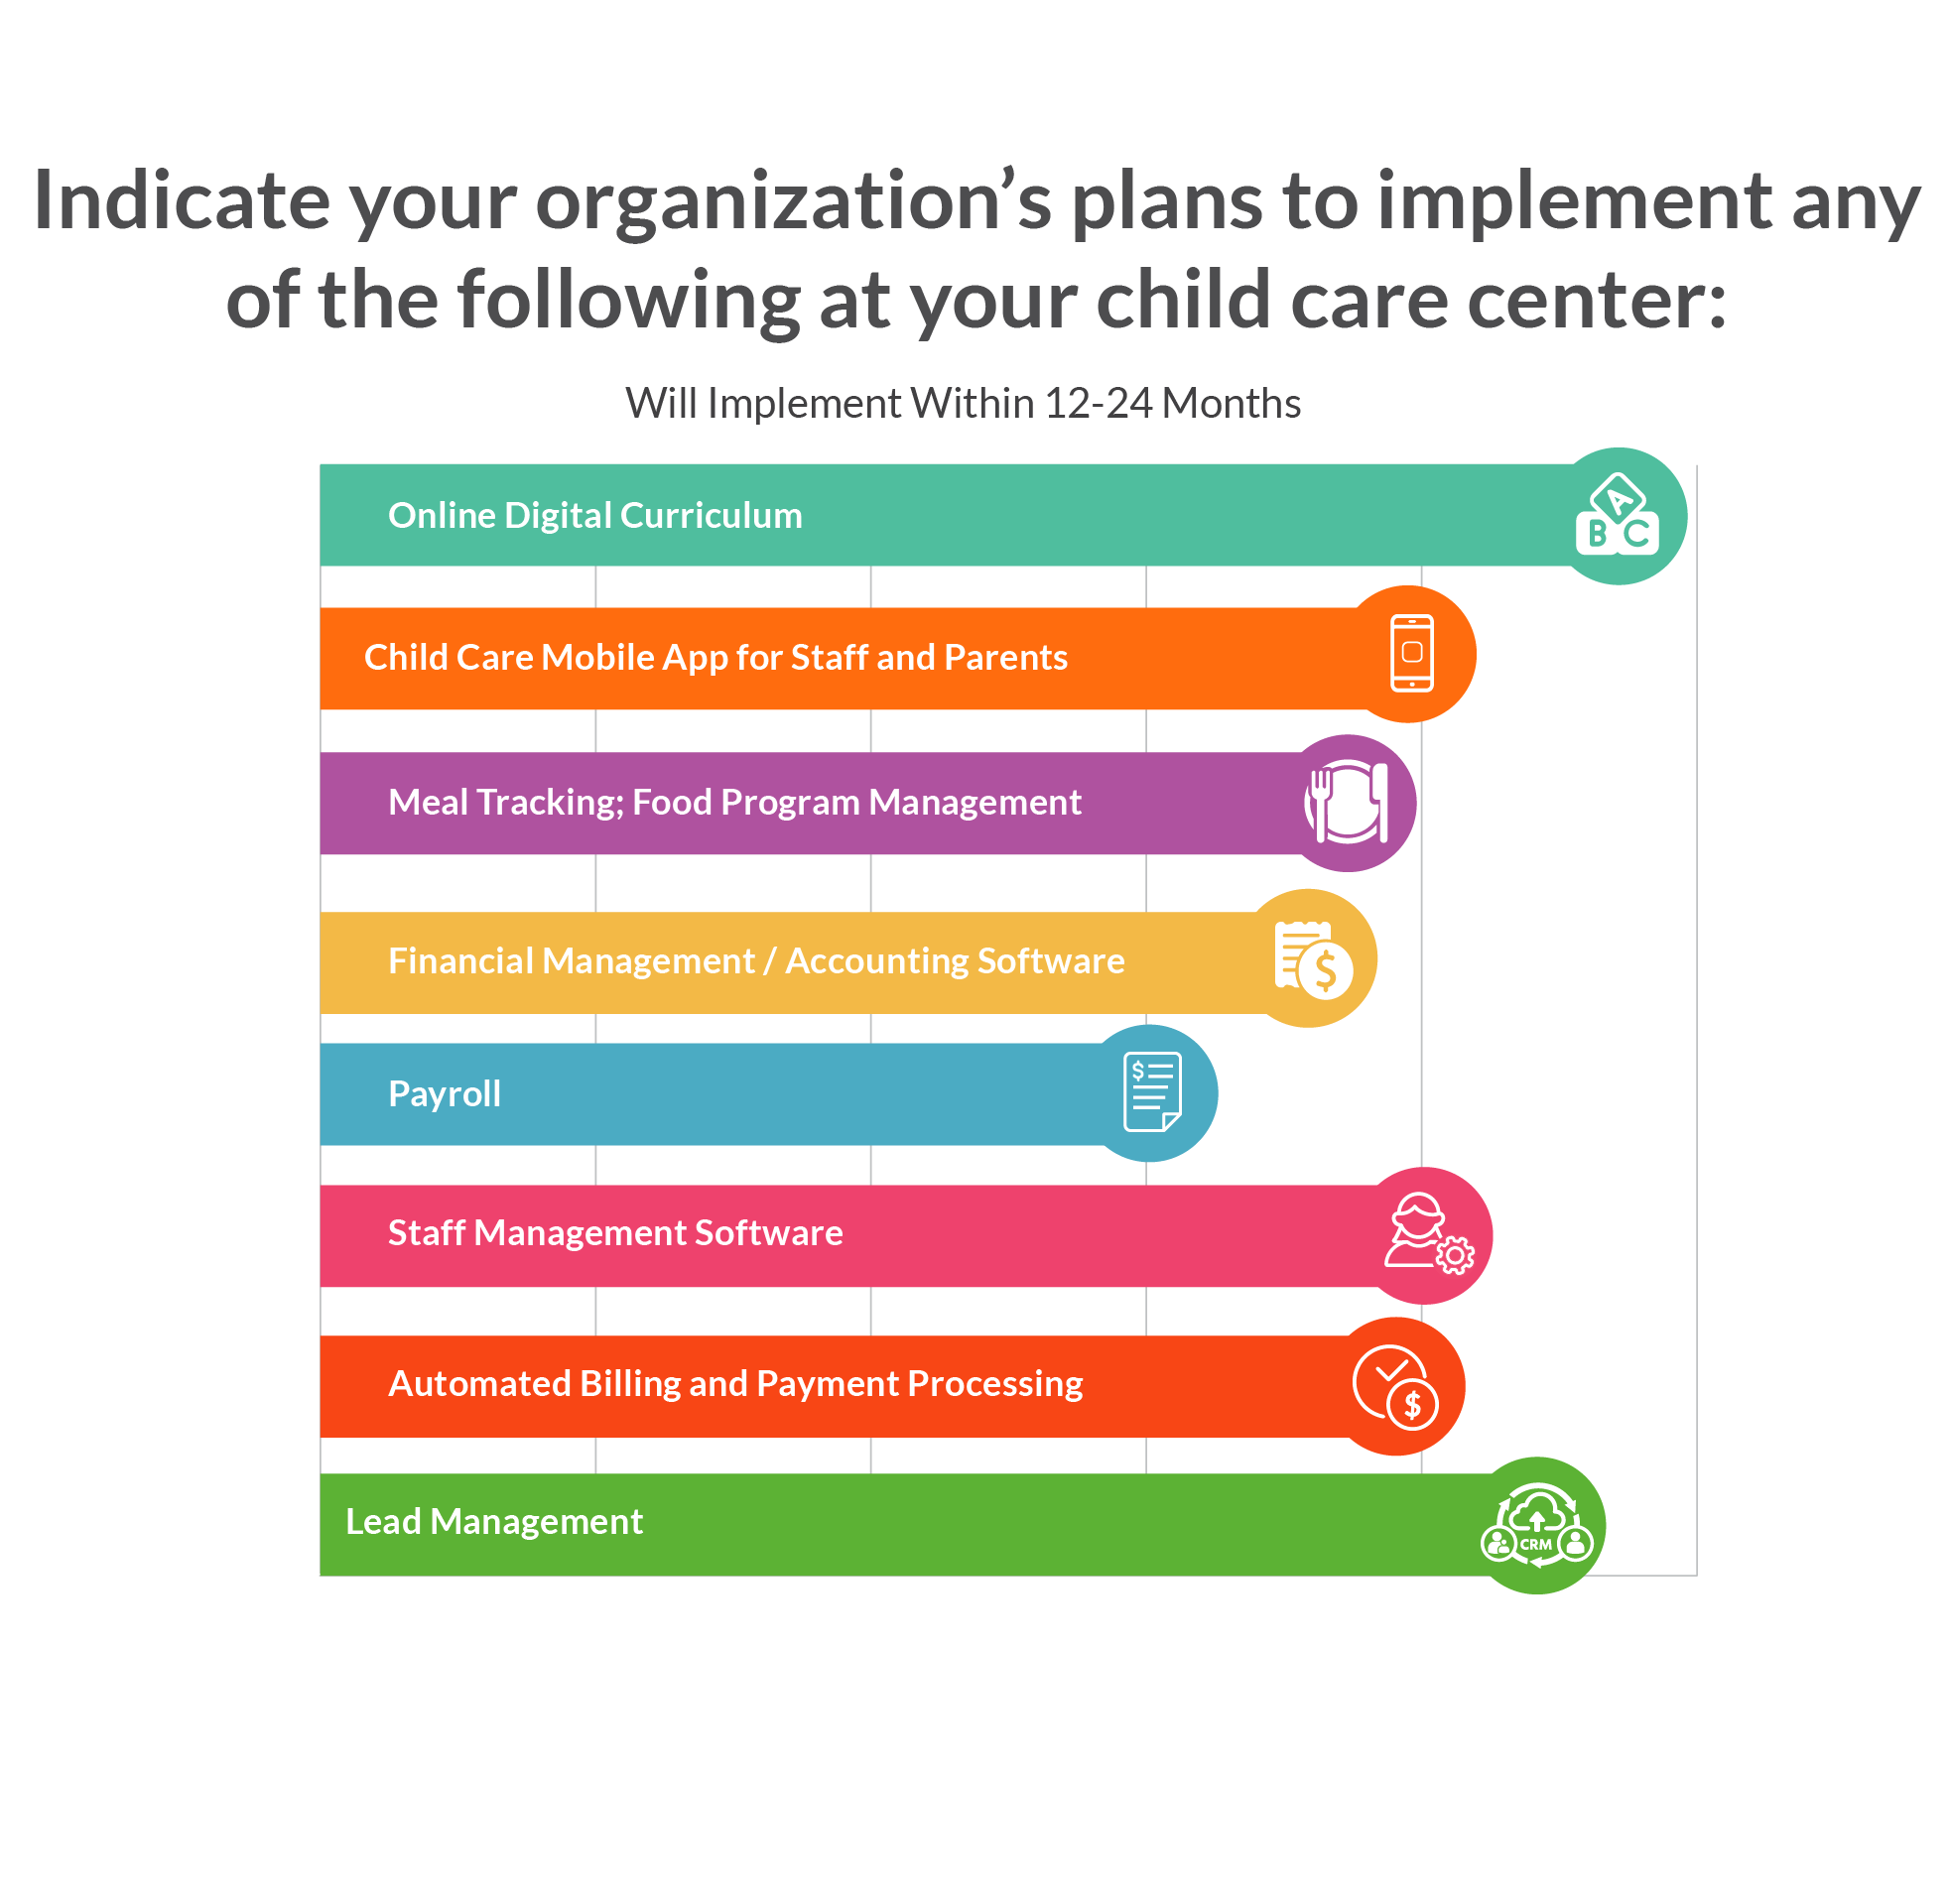 Preview of the report showing which technologies child care centers plan to implement